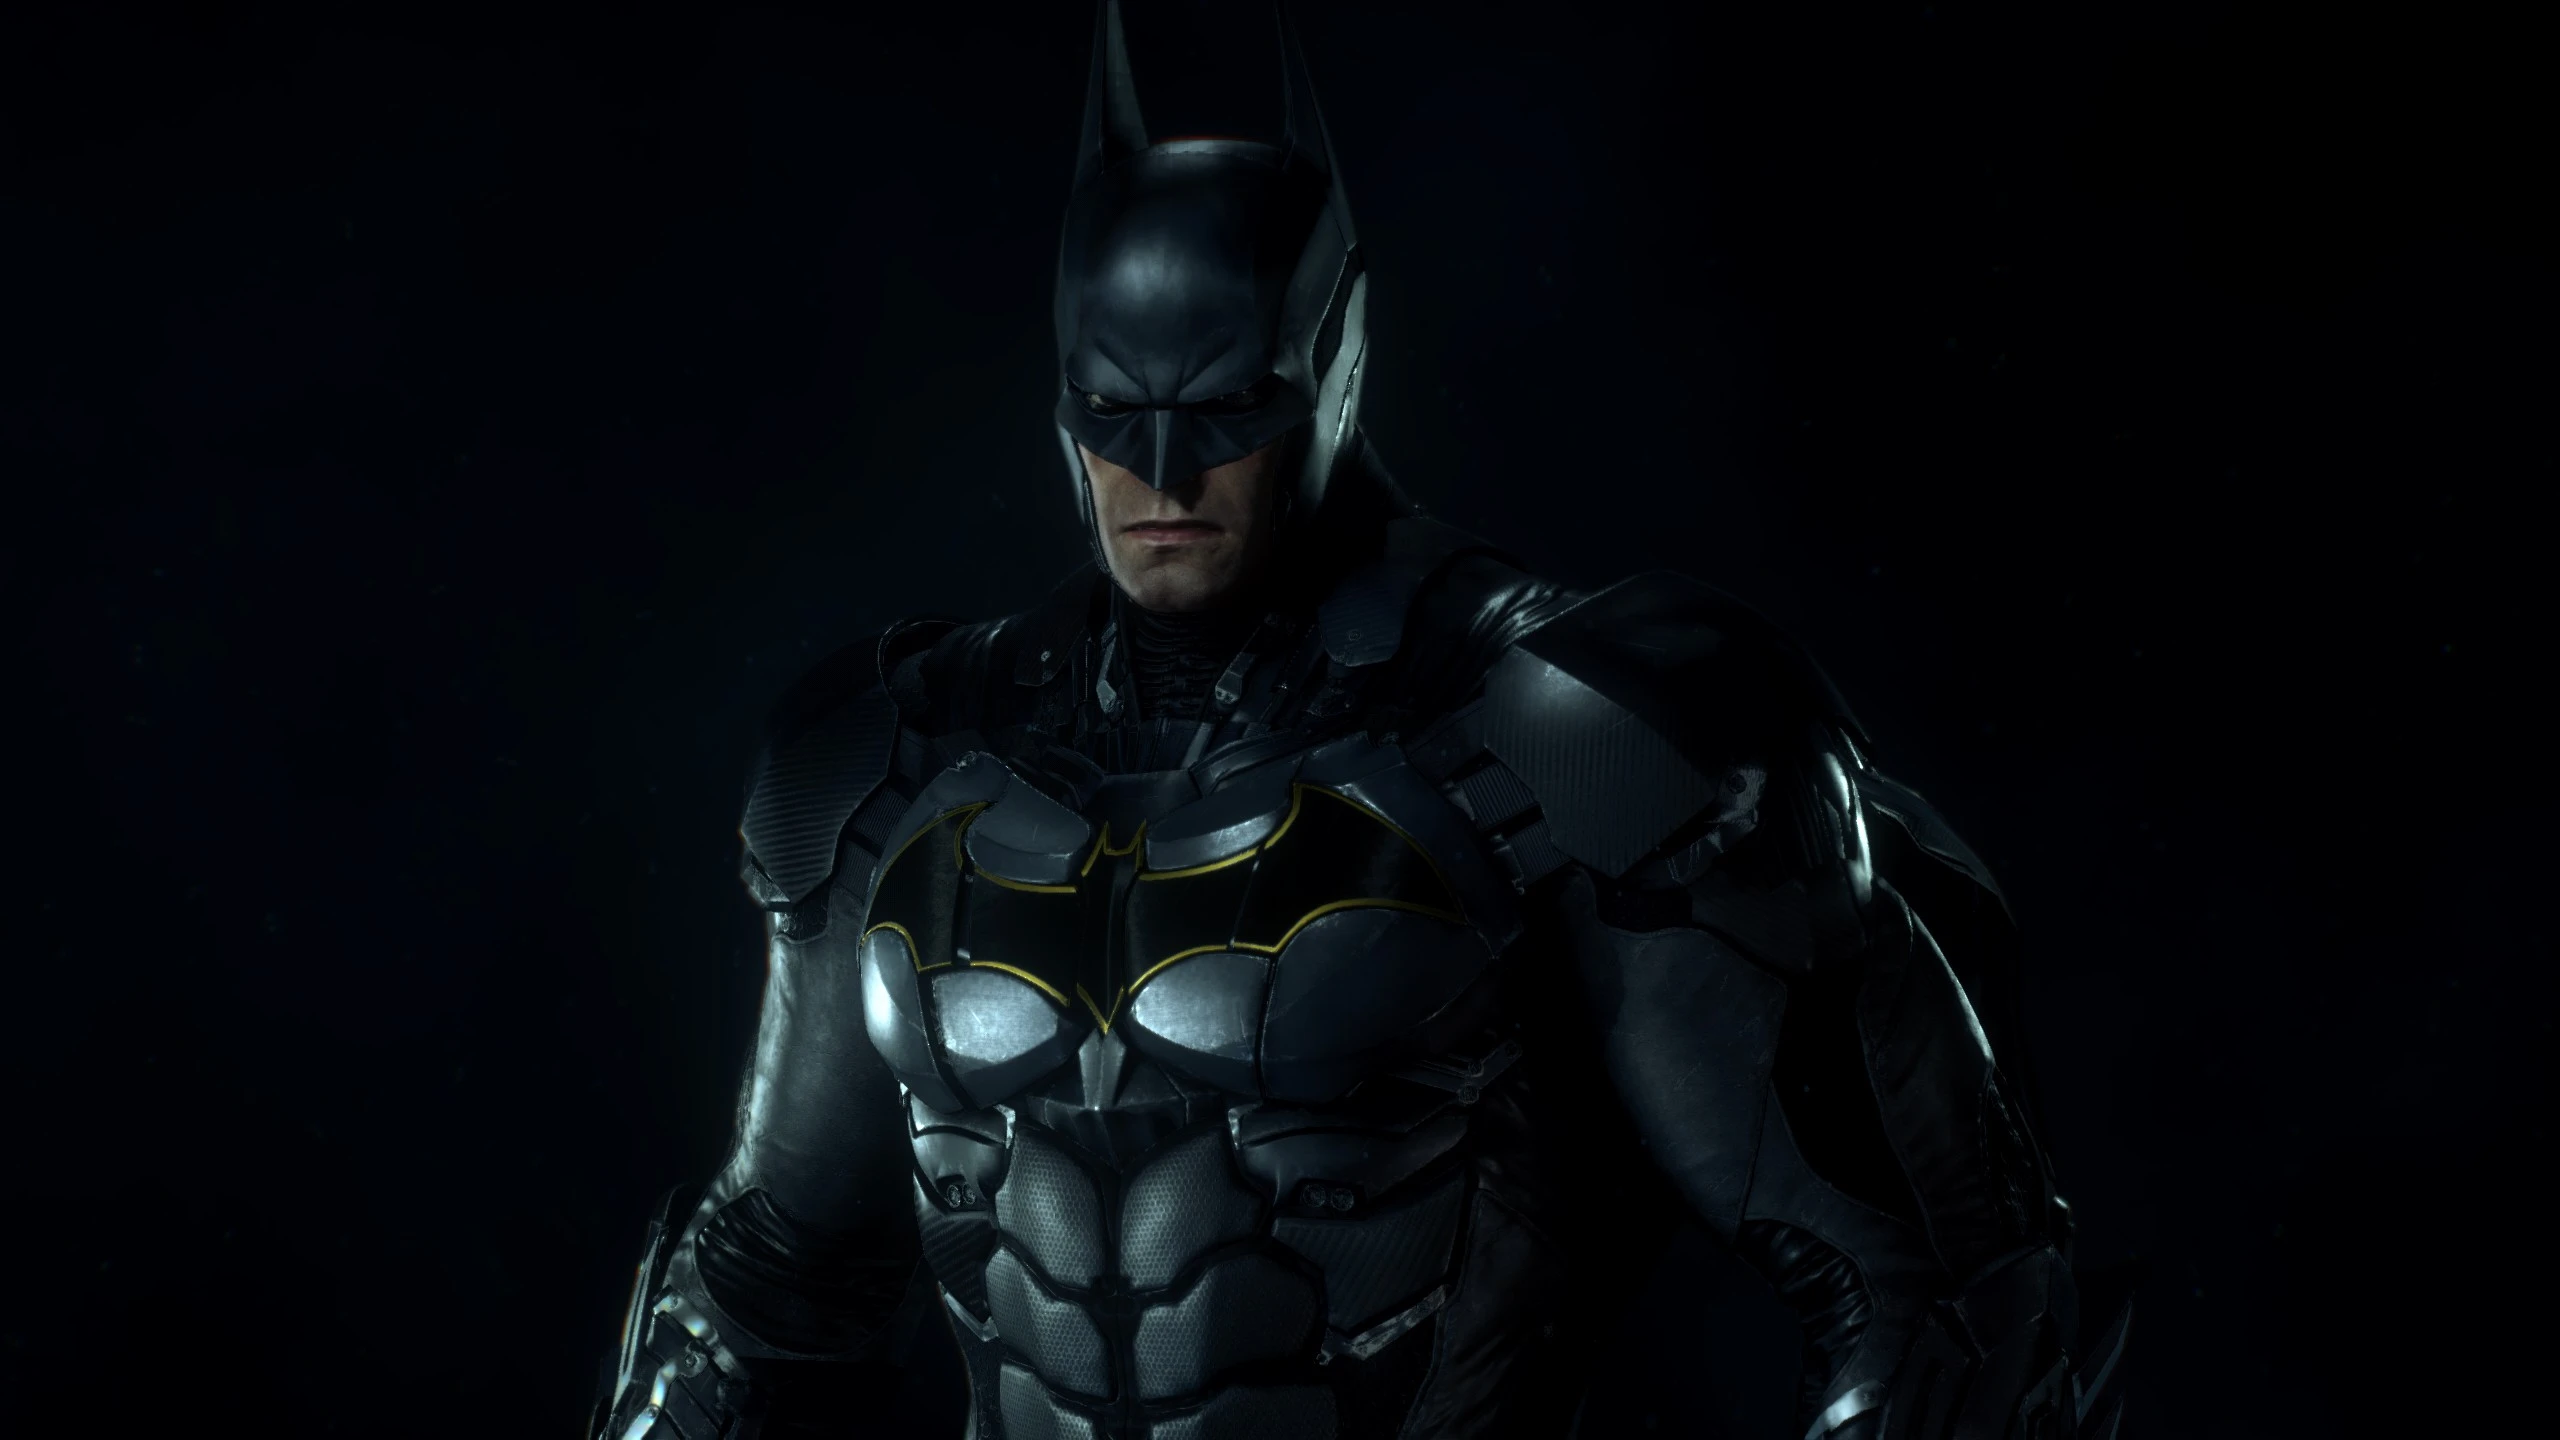 Classic Themed V8 Suit Pack (New Suit Slots) at Batman: Arkham Knight ...